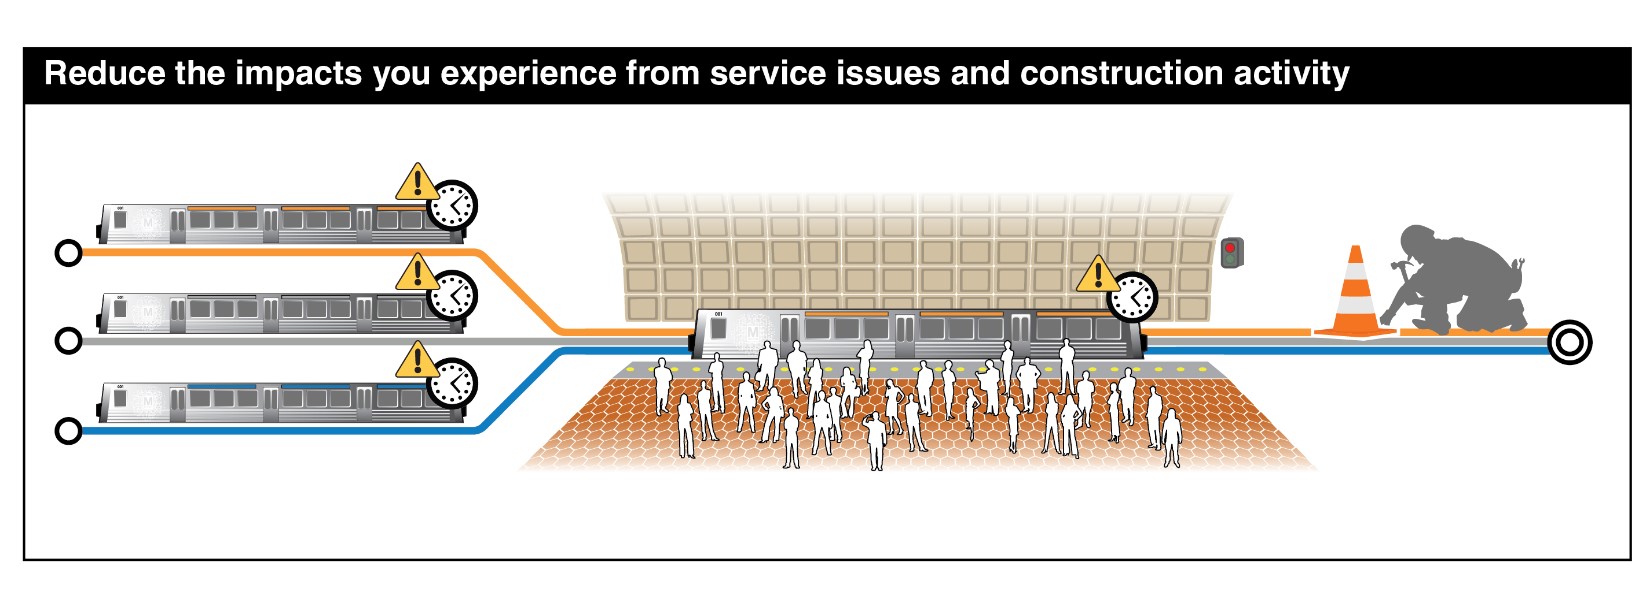 Illustration showing how construction work zones impact reliability and on time performance. Delays on one line impact all three. Metro will explore options to better manage work zones and unanticipated delays.